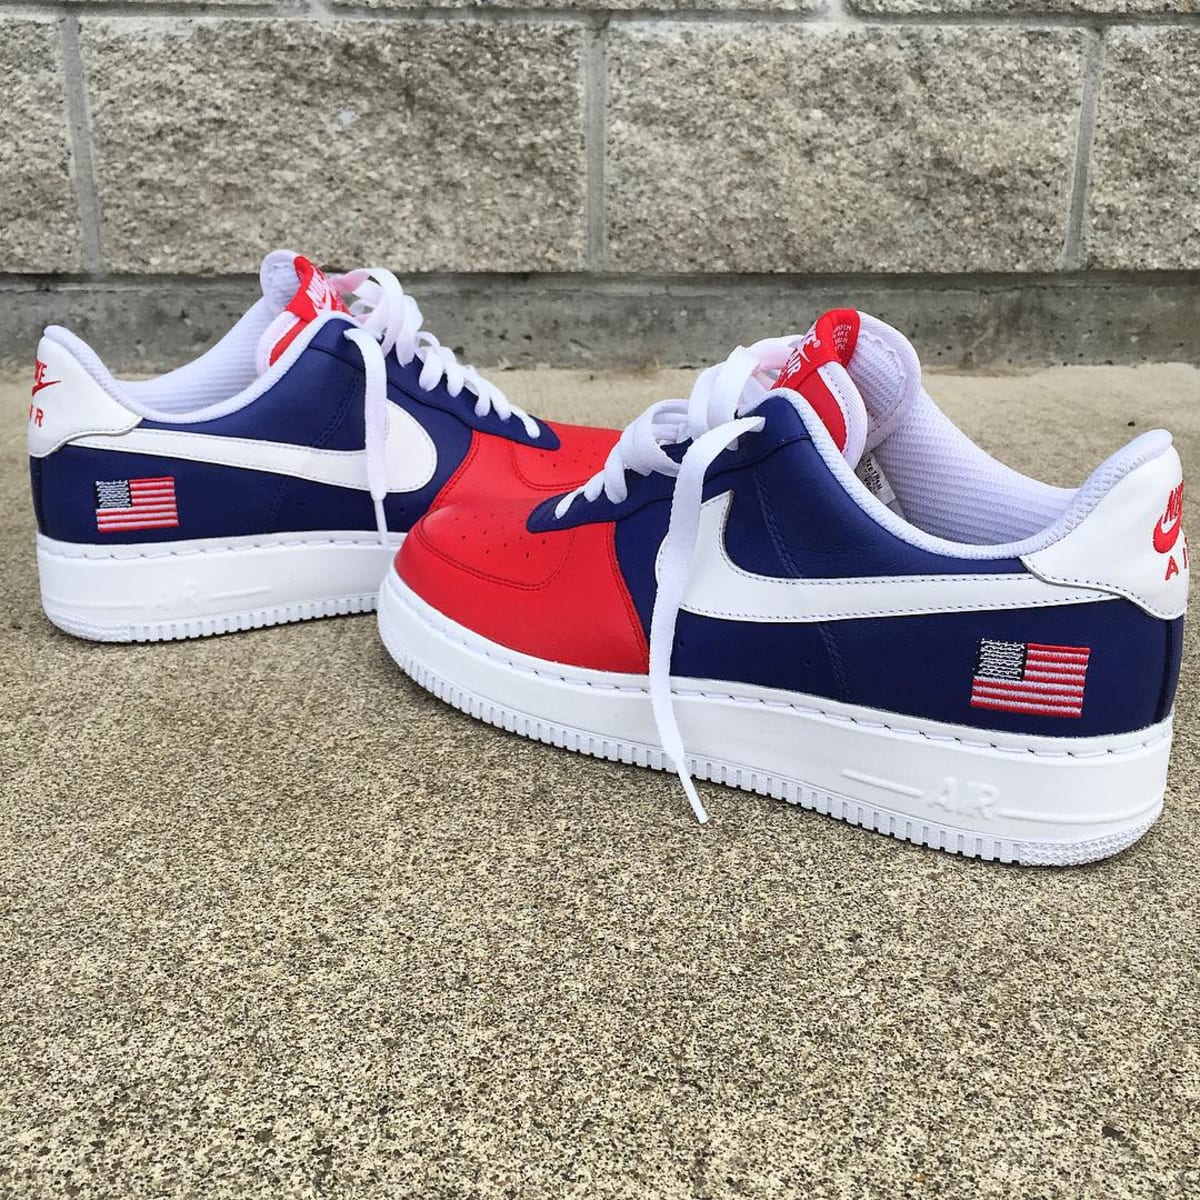 NIKEiD Air Force 1 Low USA - NIKEiD Nike By You USA Designs | Sole